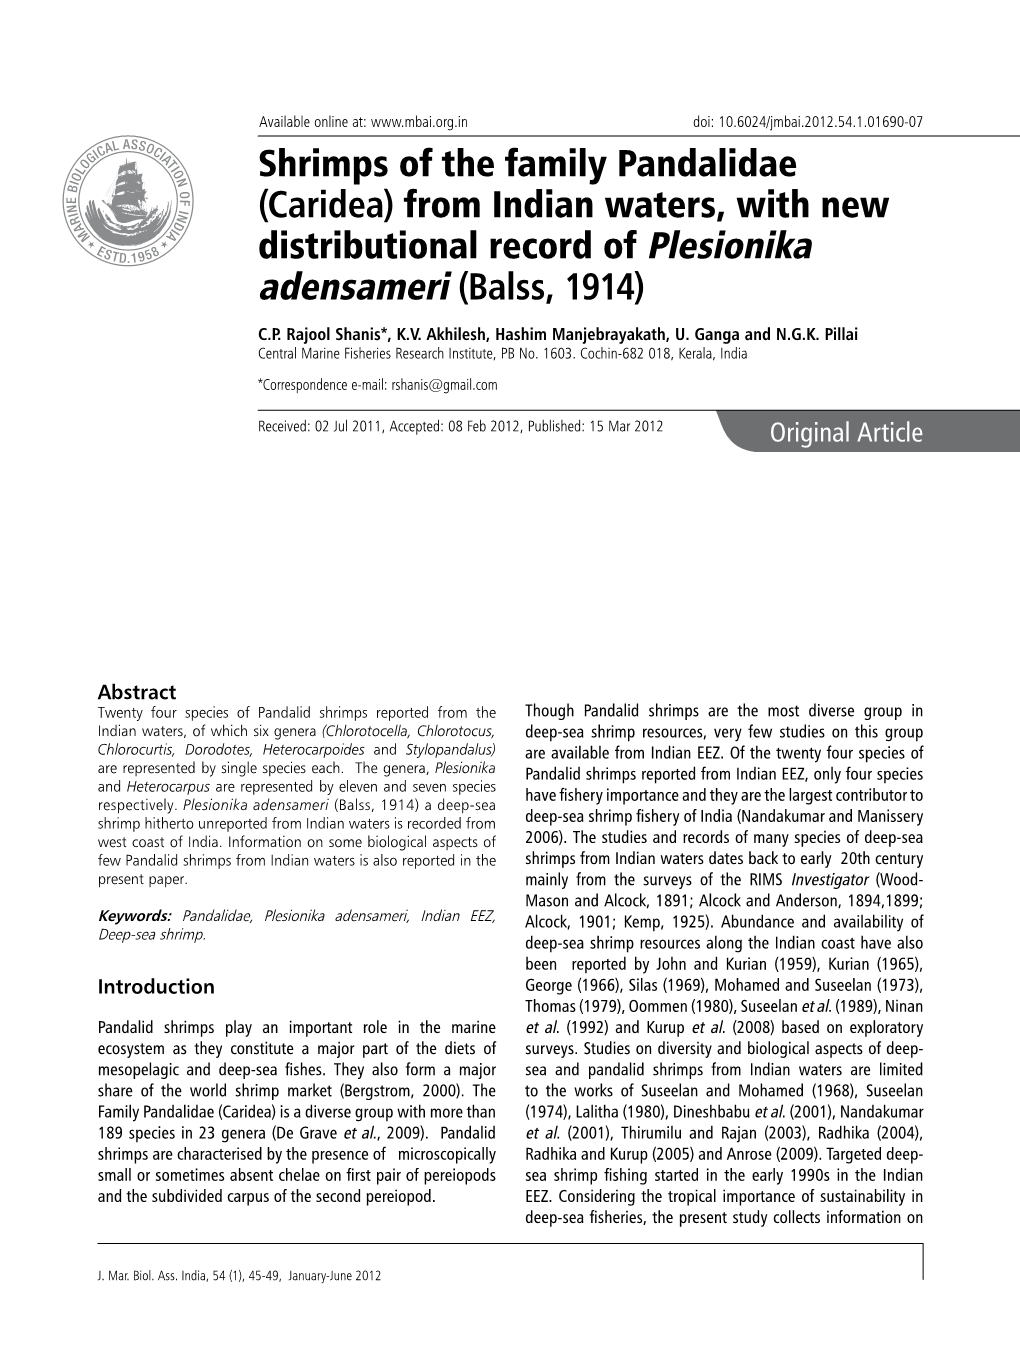 Shrimps of the Family Pandalidae (Caridea) from Indian Waters, with New Distributional Record of Plesionika Adensameri (Balss, 1914)